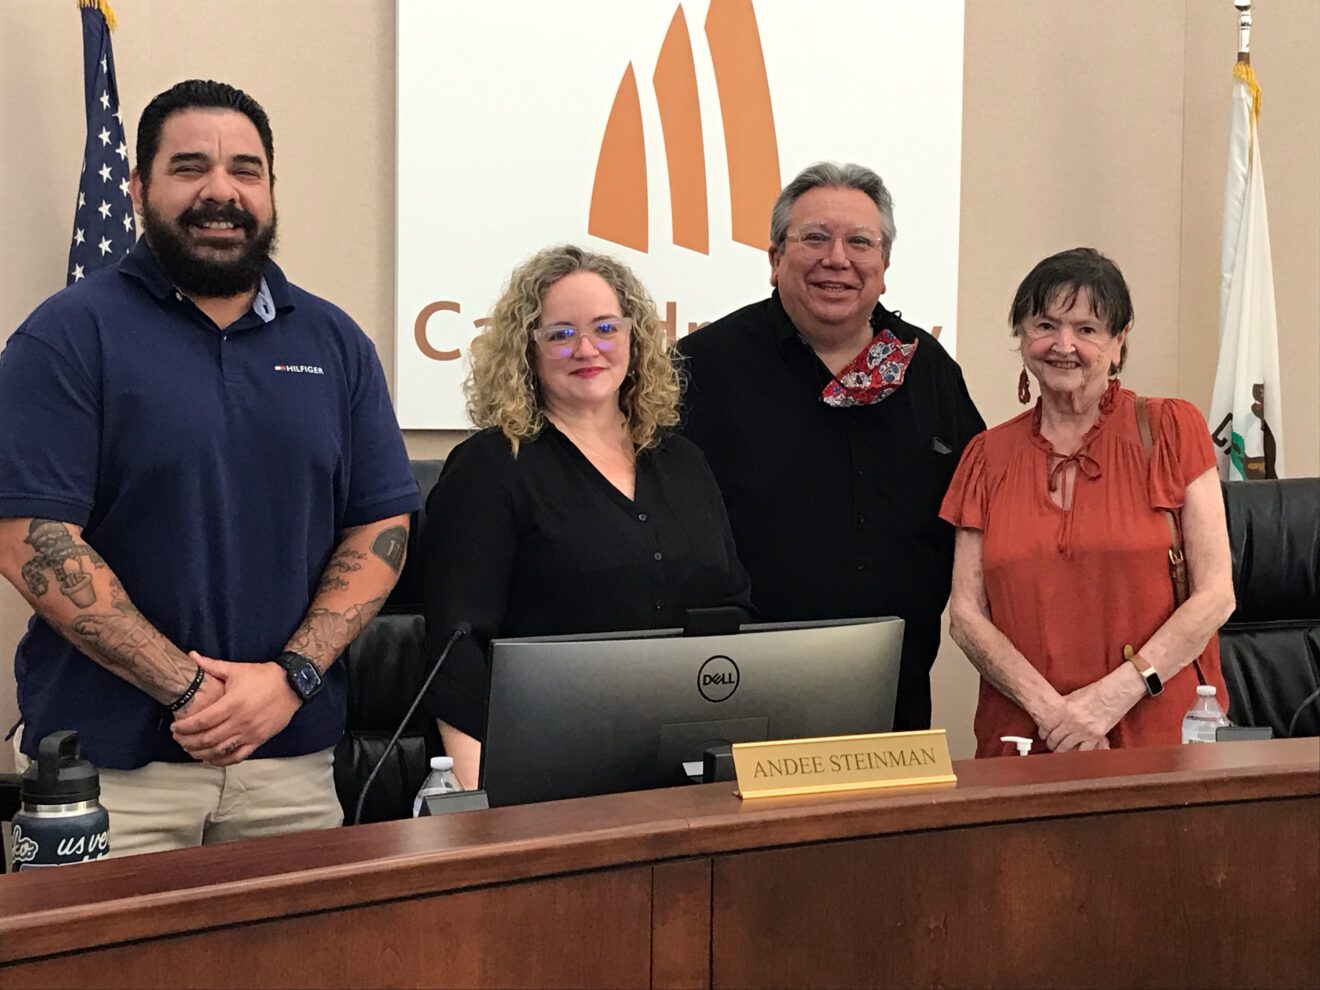 Cathedral City’s Historic Preservation Committee Forwards Draft Ordinance to City Council with Recommendation for Approval